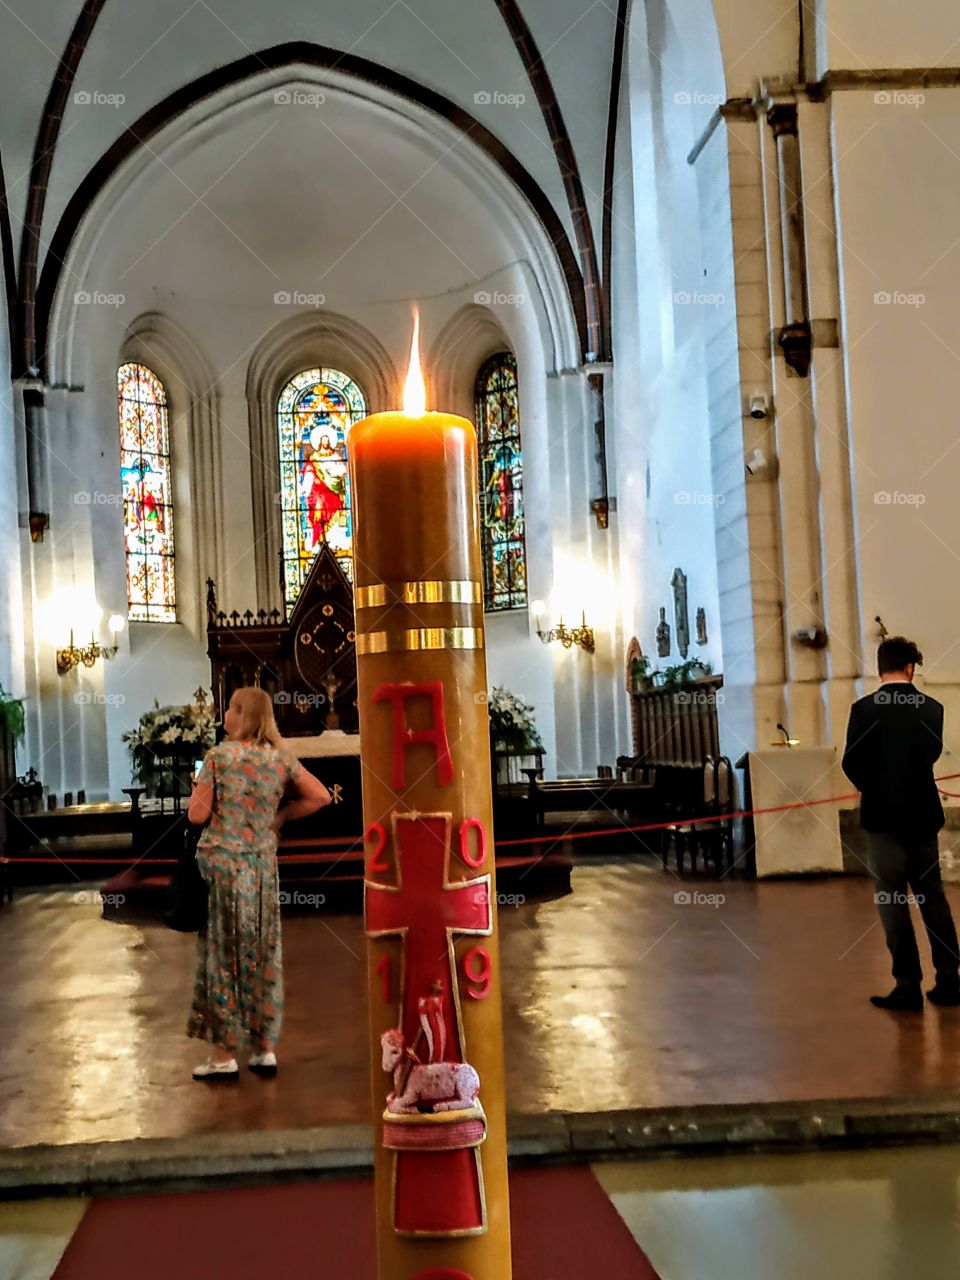 Candle in the temple. (Latvia, Riga, June, 2019).